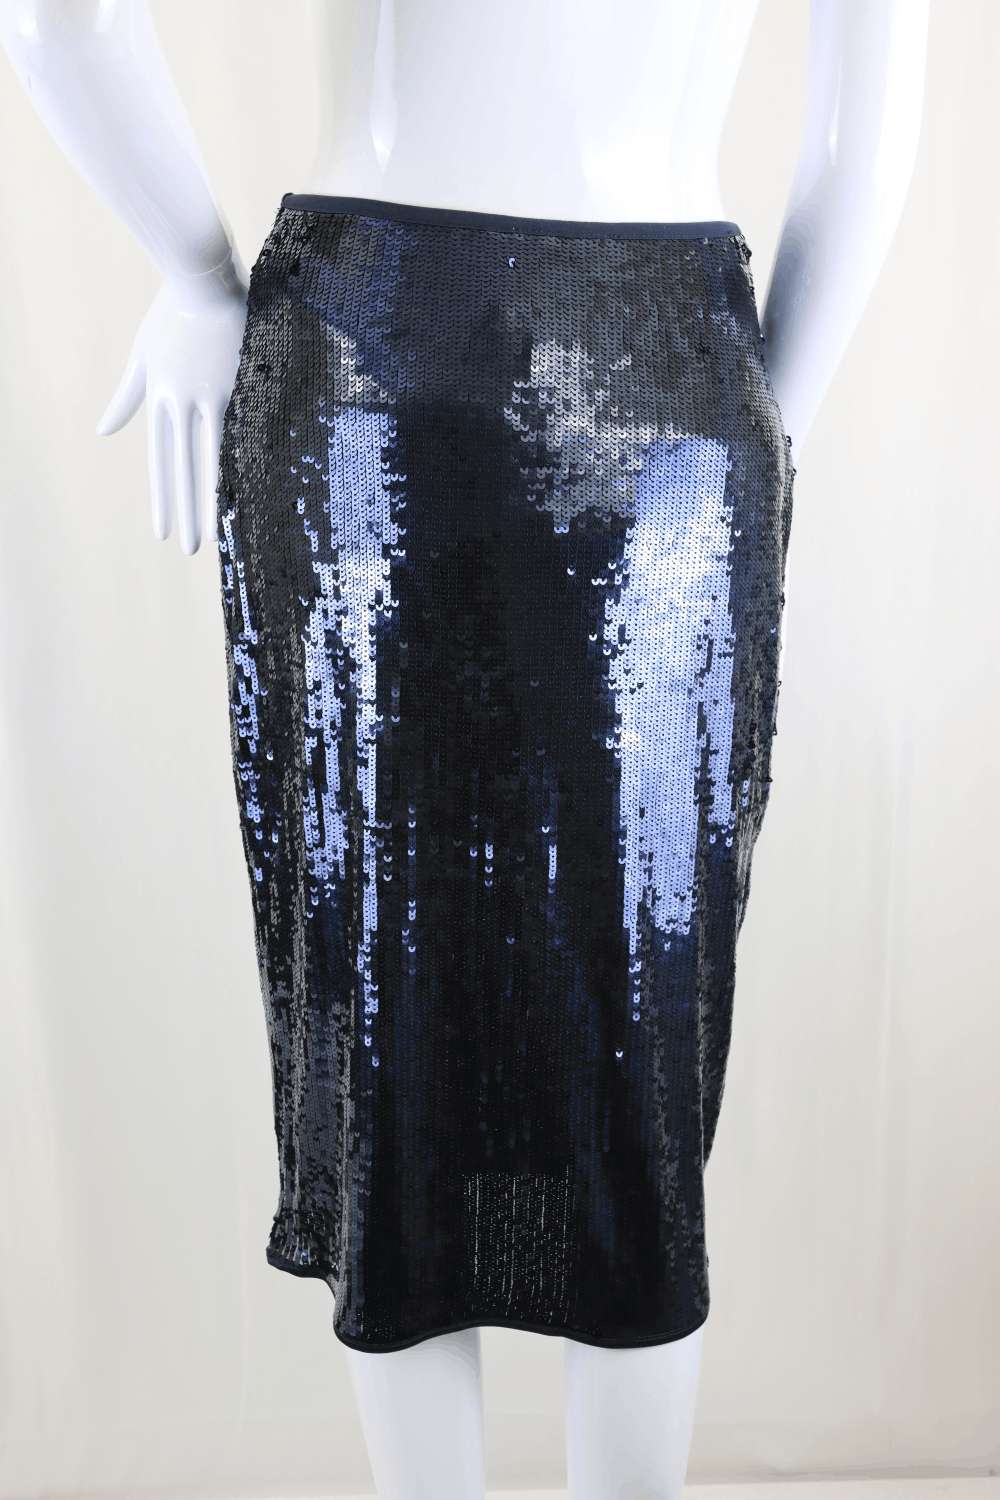 Preview Navy Sequined Pencil Skirt 8